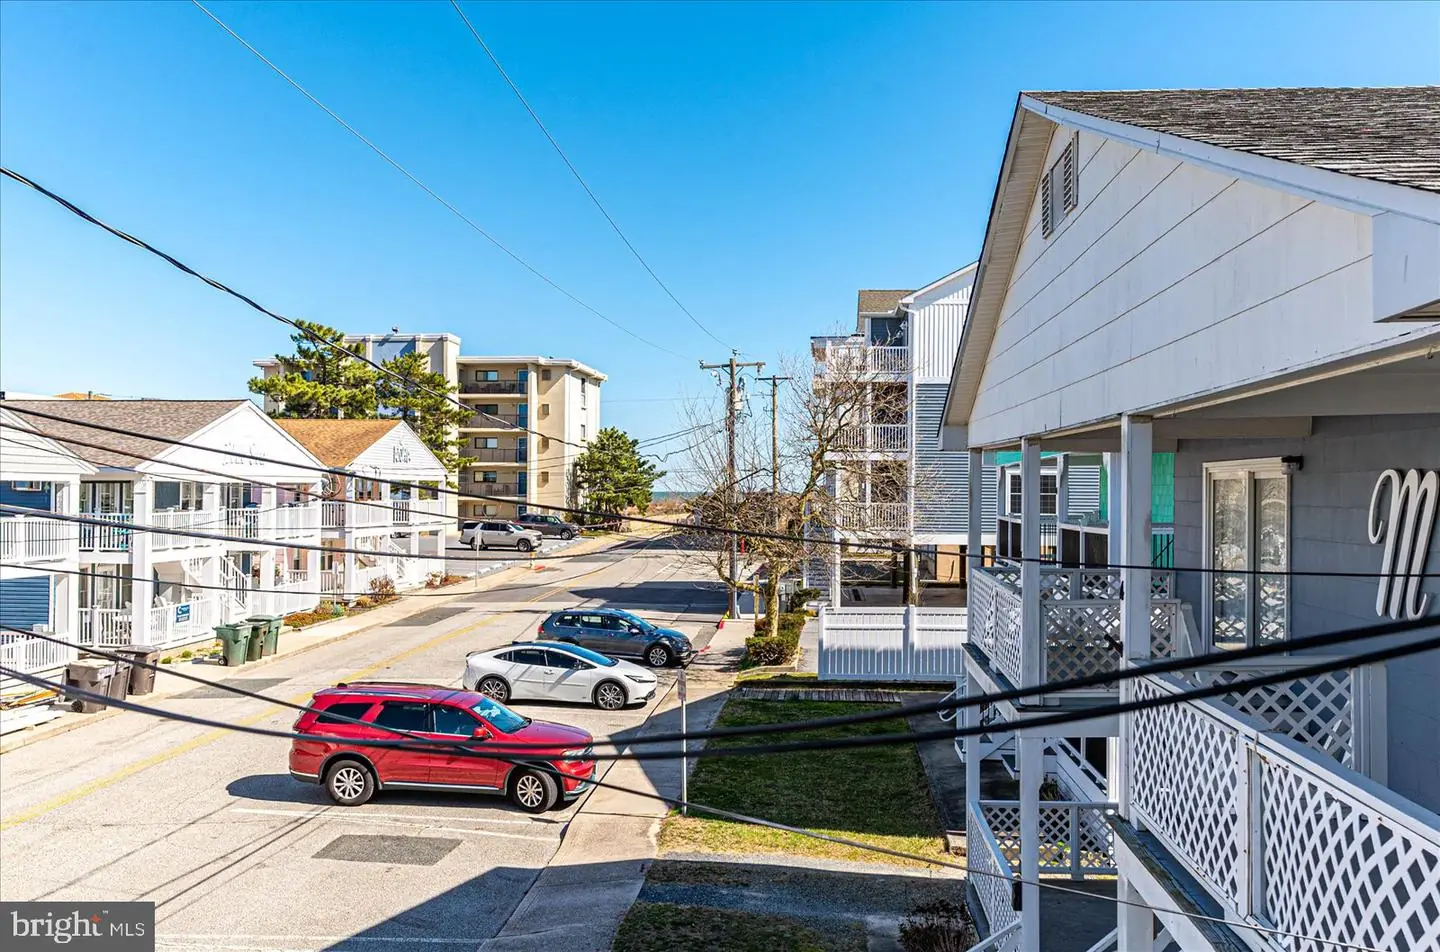 MDWO2019490-802929062414-2024-03-16-10-46-22 15 57th St | Ocean City, MD Real Estate For Sale | MLS# Mdwo2019490  - 1st Choice Properties